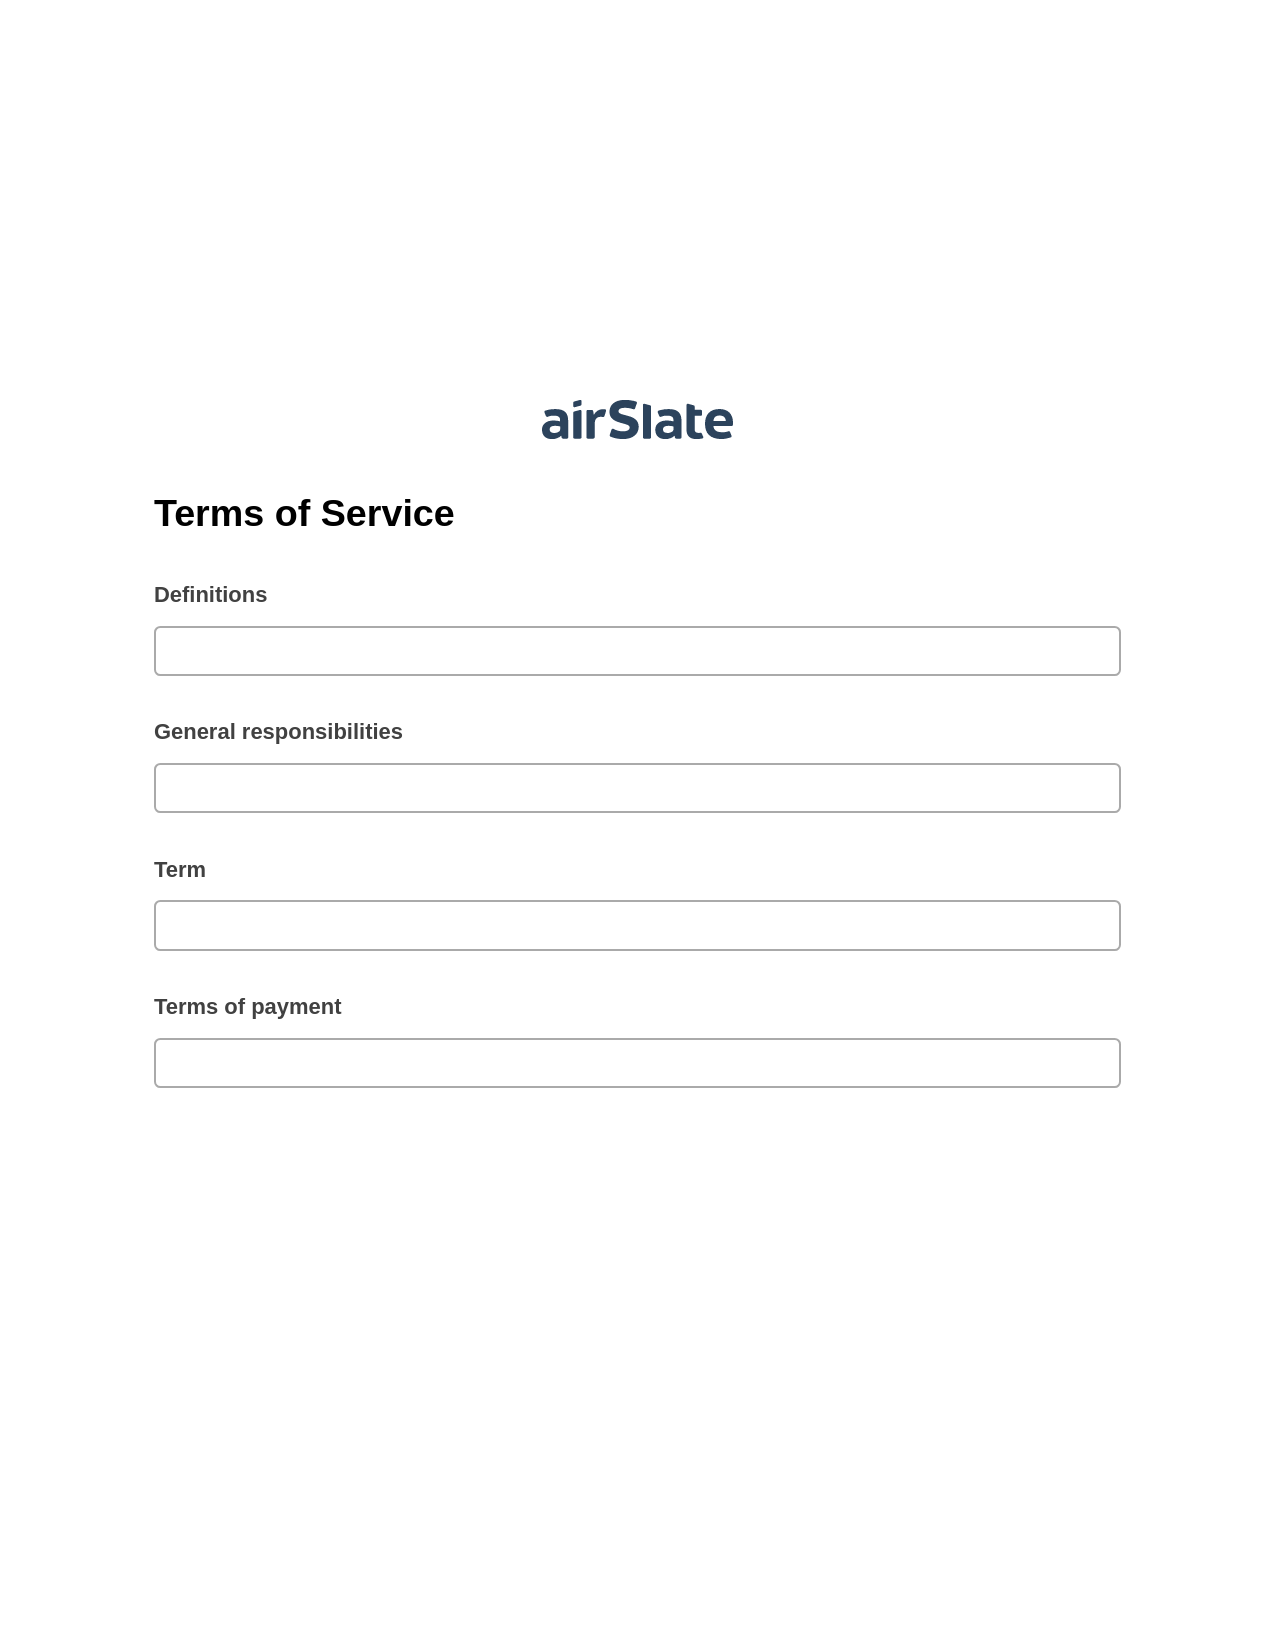 Terms of Service Pre-fill from CSV File Dropdown Options Bot, Jira Bot, Box Bot